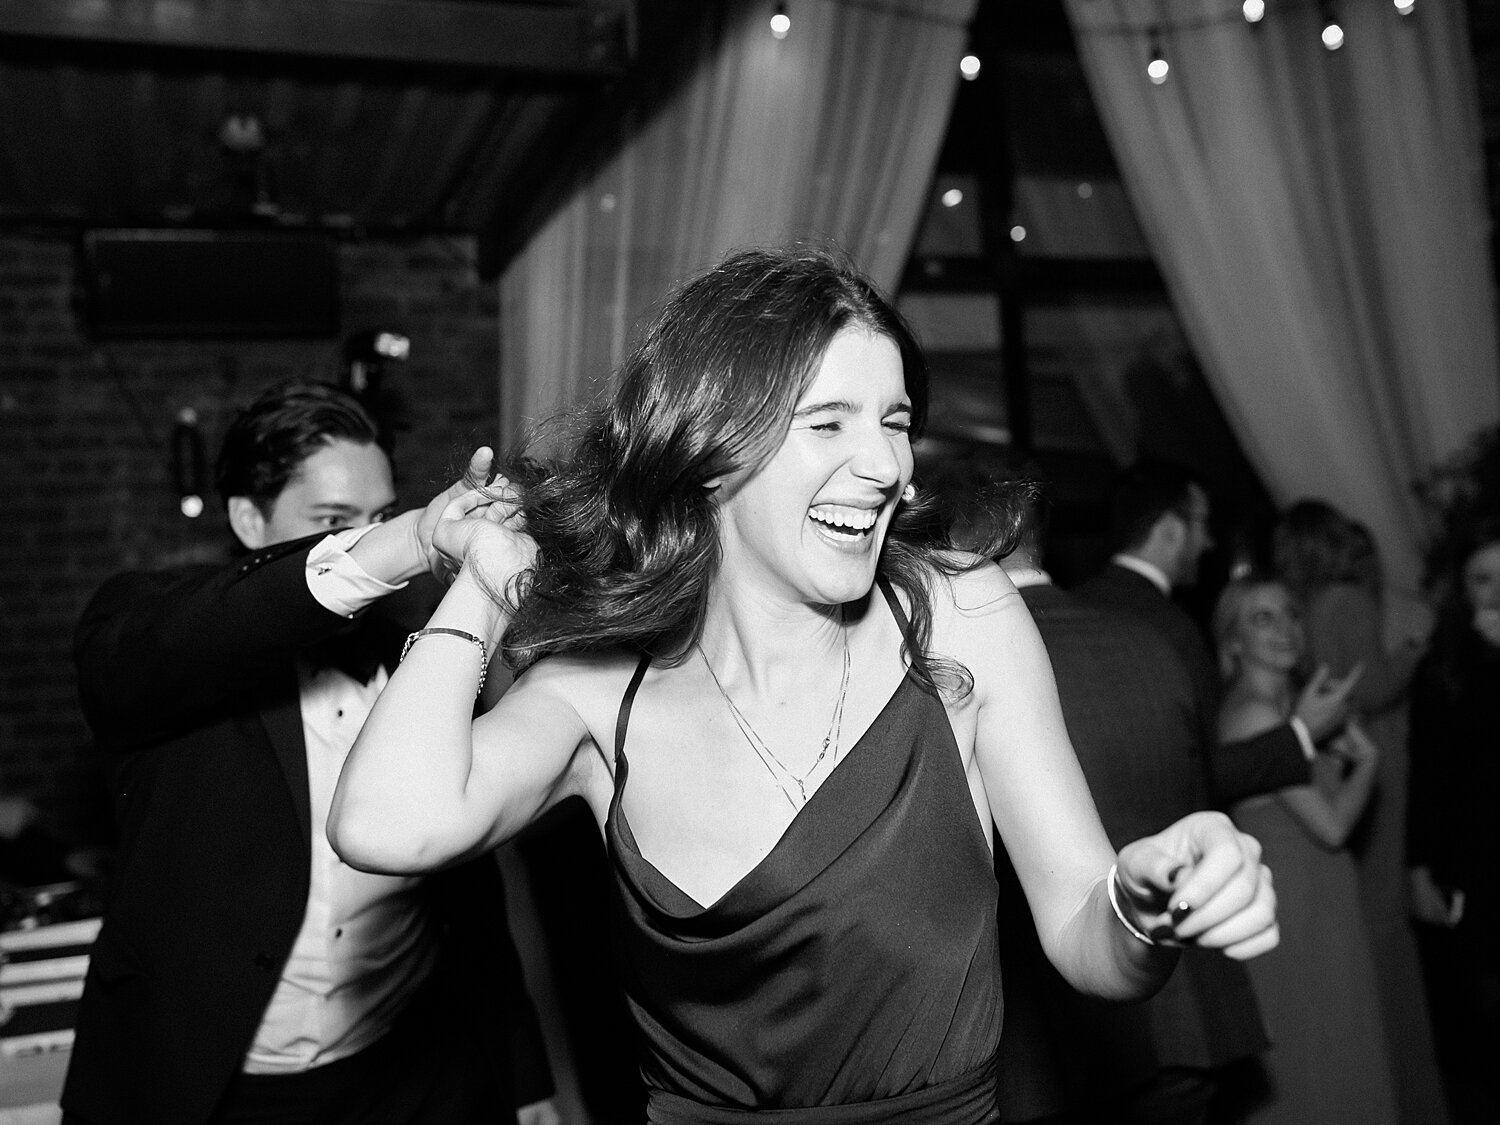 reception fun at the Foundry photographed by Asher Gardner Photography